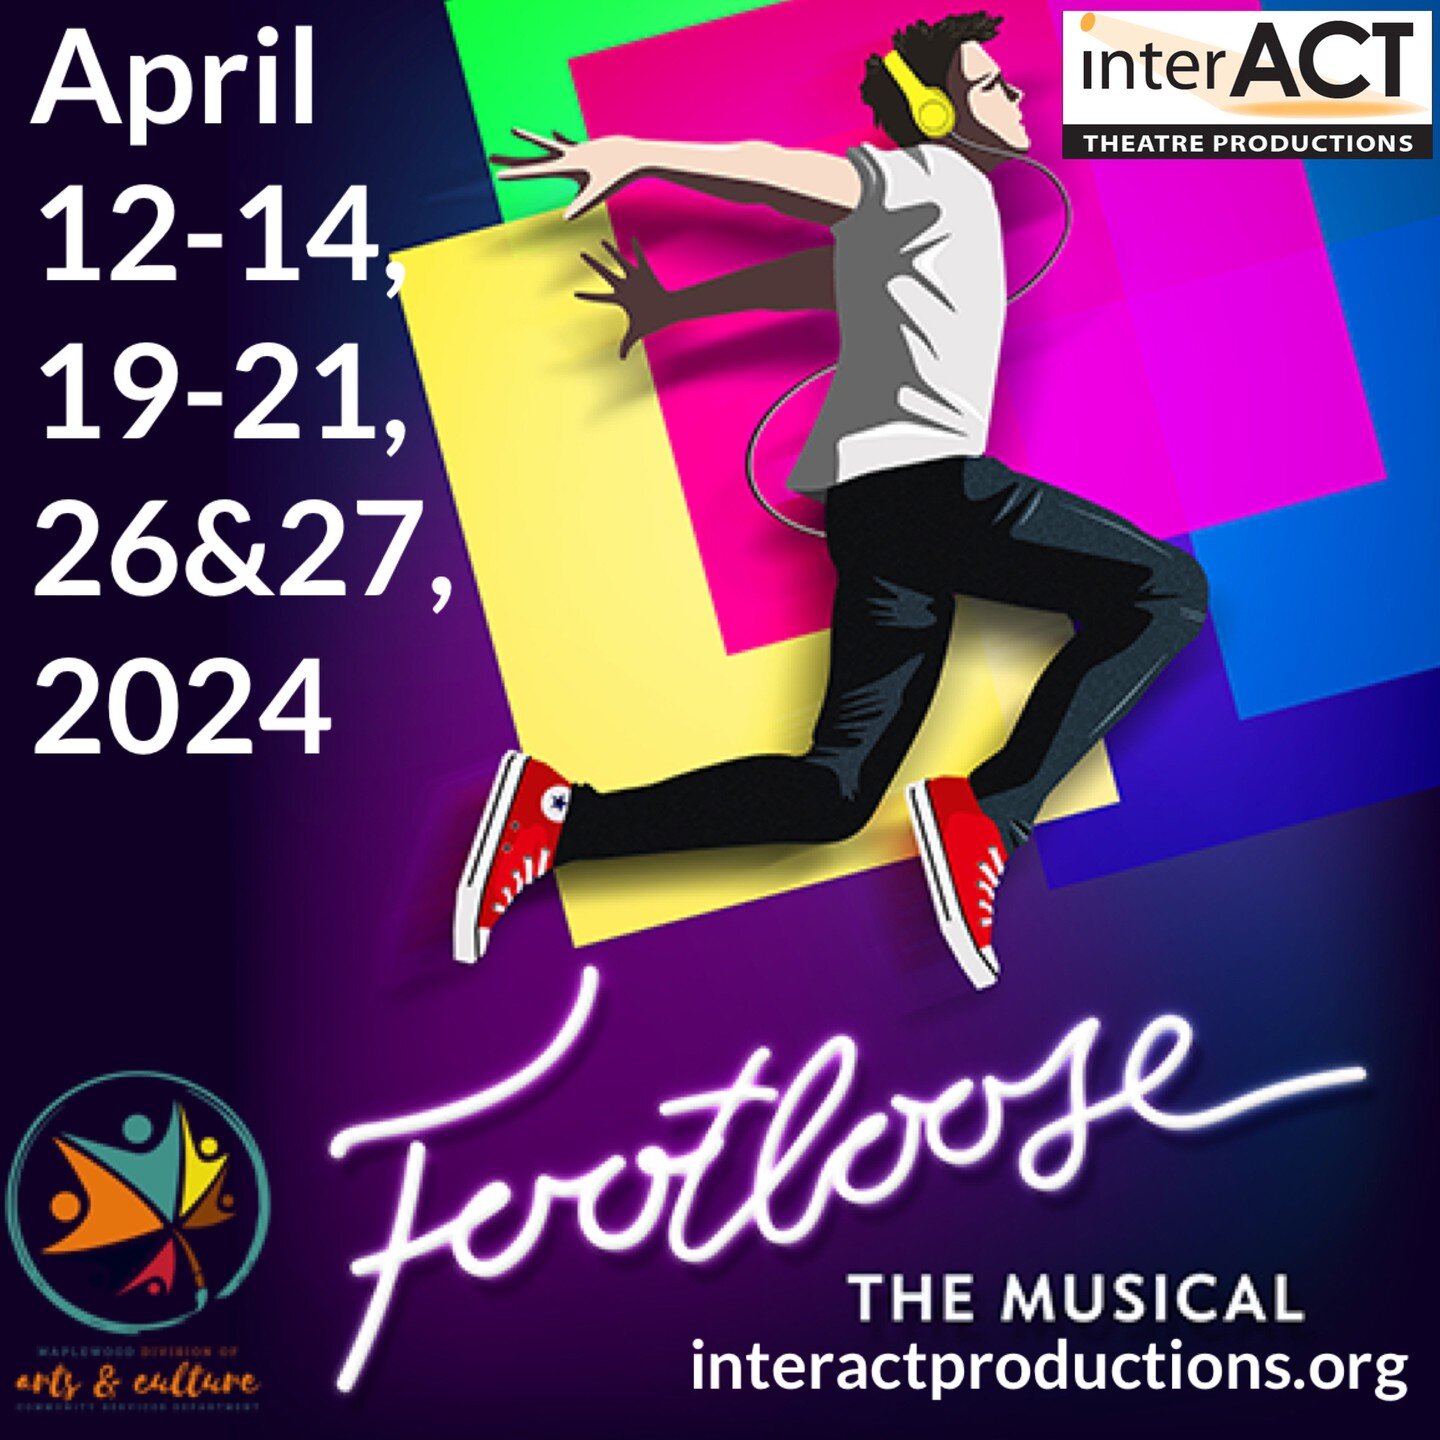 Interact Theater Productions Presents Footloose - The Musical

About the Show
When Ren and his mother move from Chicago to a small farming town, he is prepared for the inevitable adjustment period at his new high school. But he&rsquo;s not prepared f